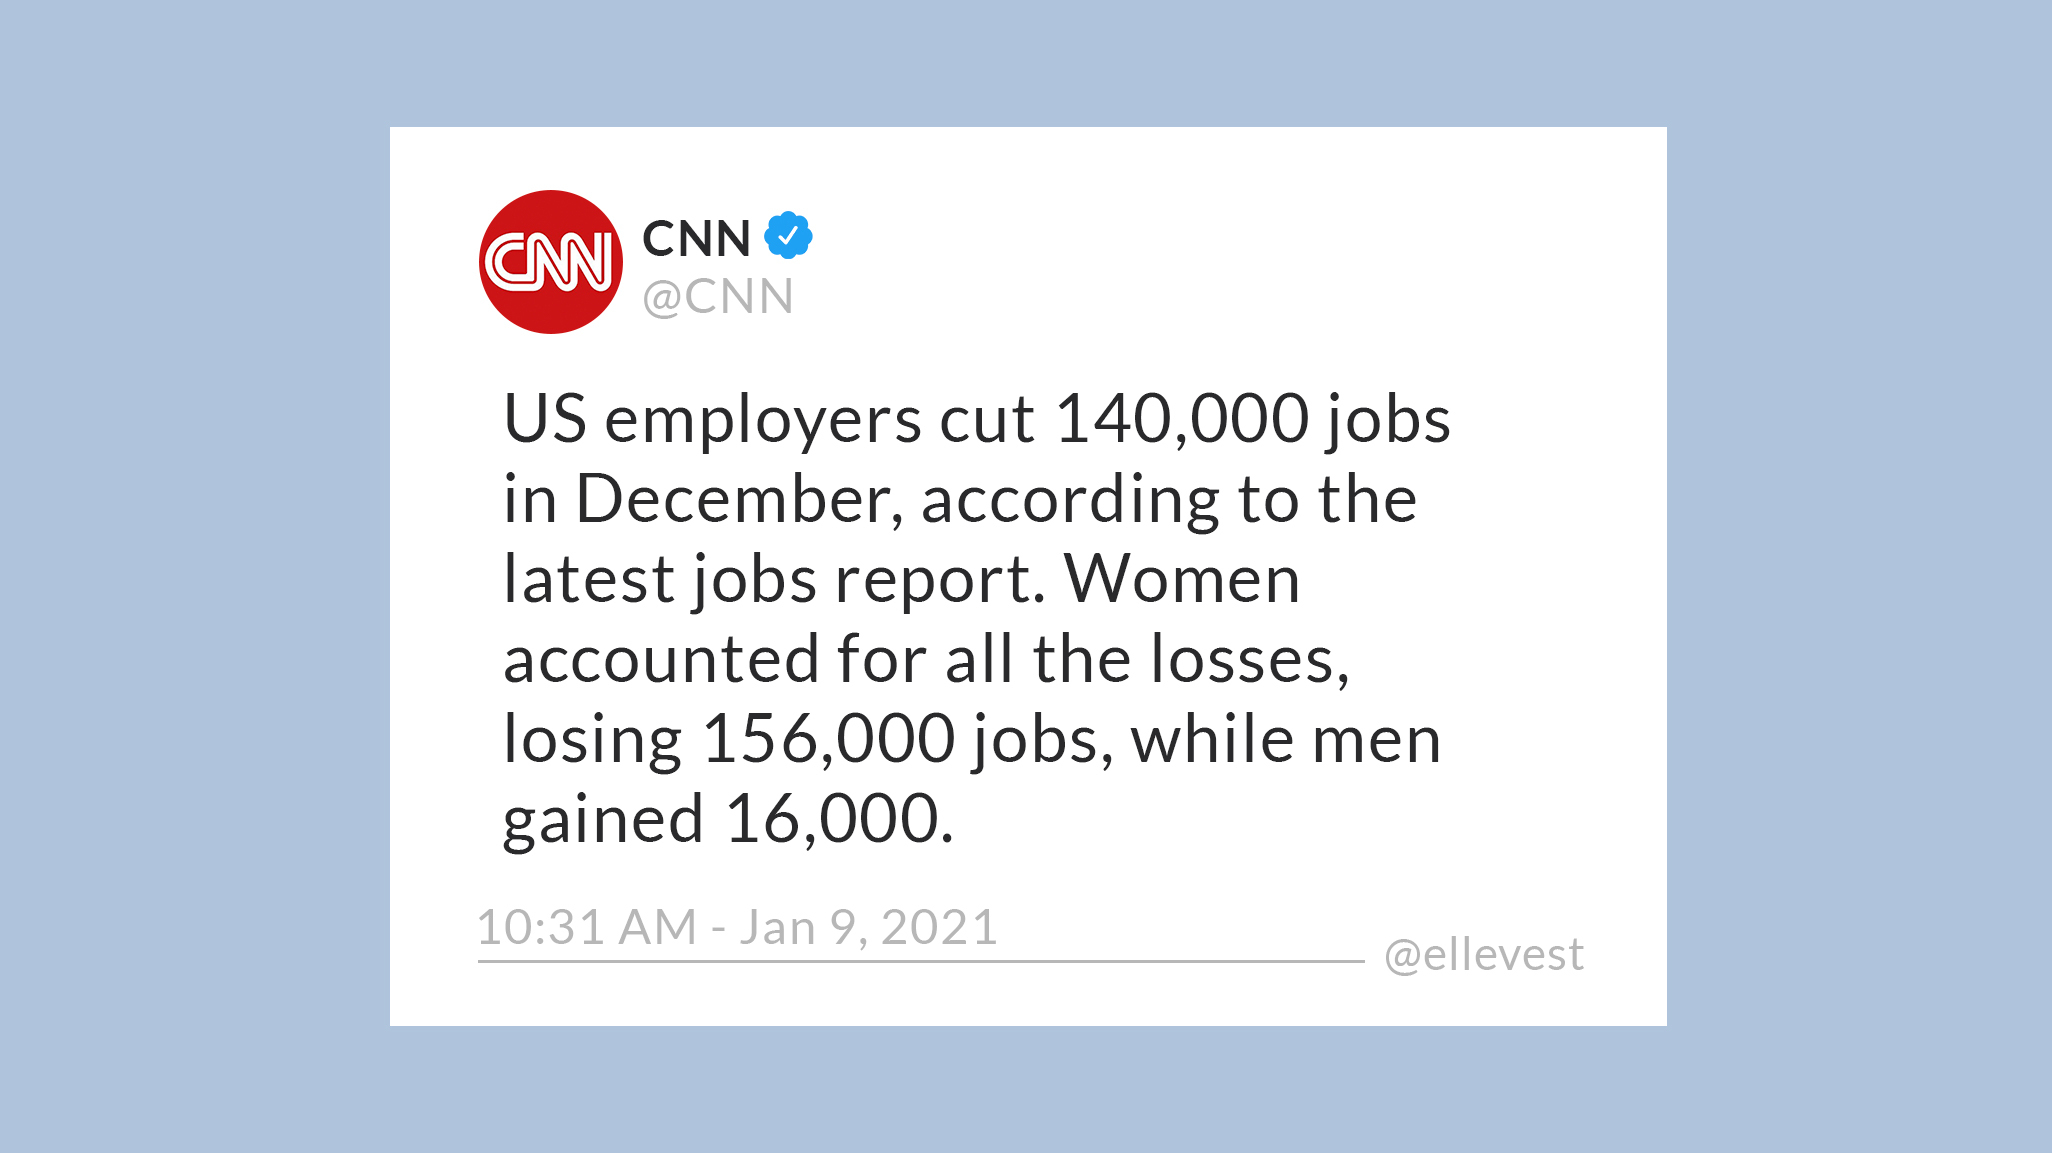 A tweet by CNN saying: “US employers cut 140,000 jobs in December, according to the latest jobs report. Women accounted for all the losses, losing 156,000 jobs, while men gained 16,000.”